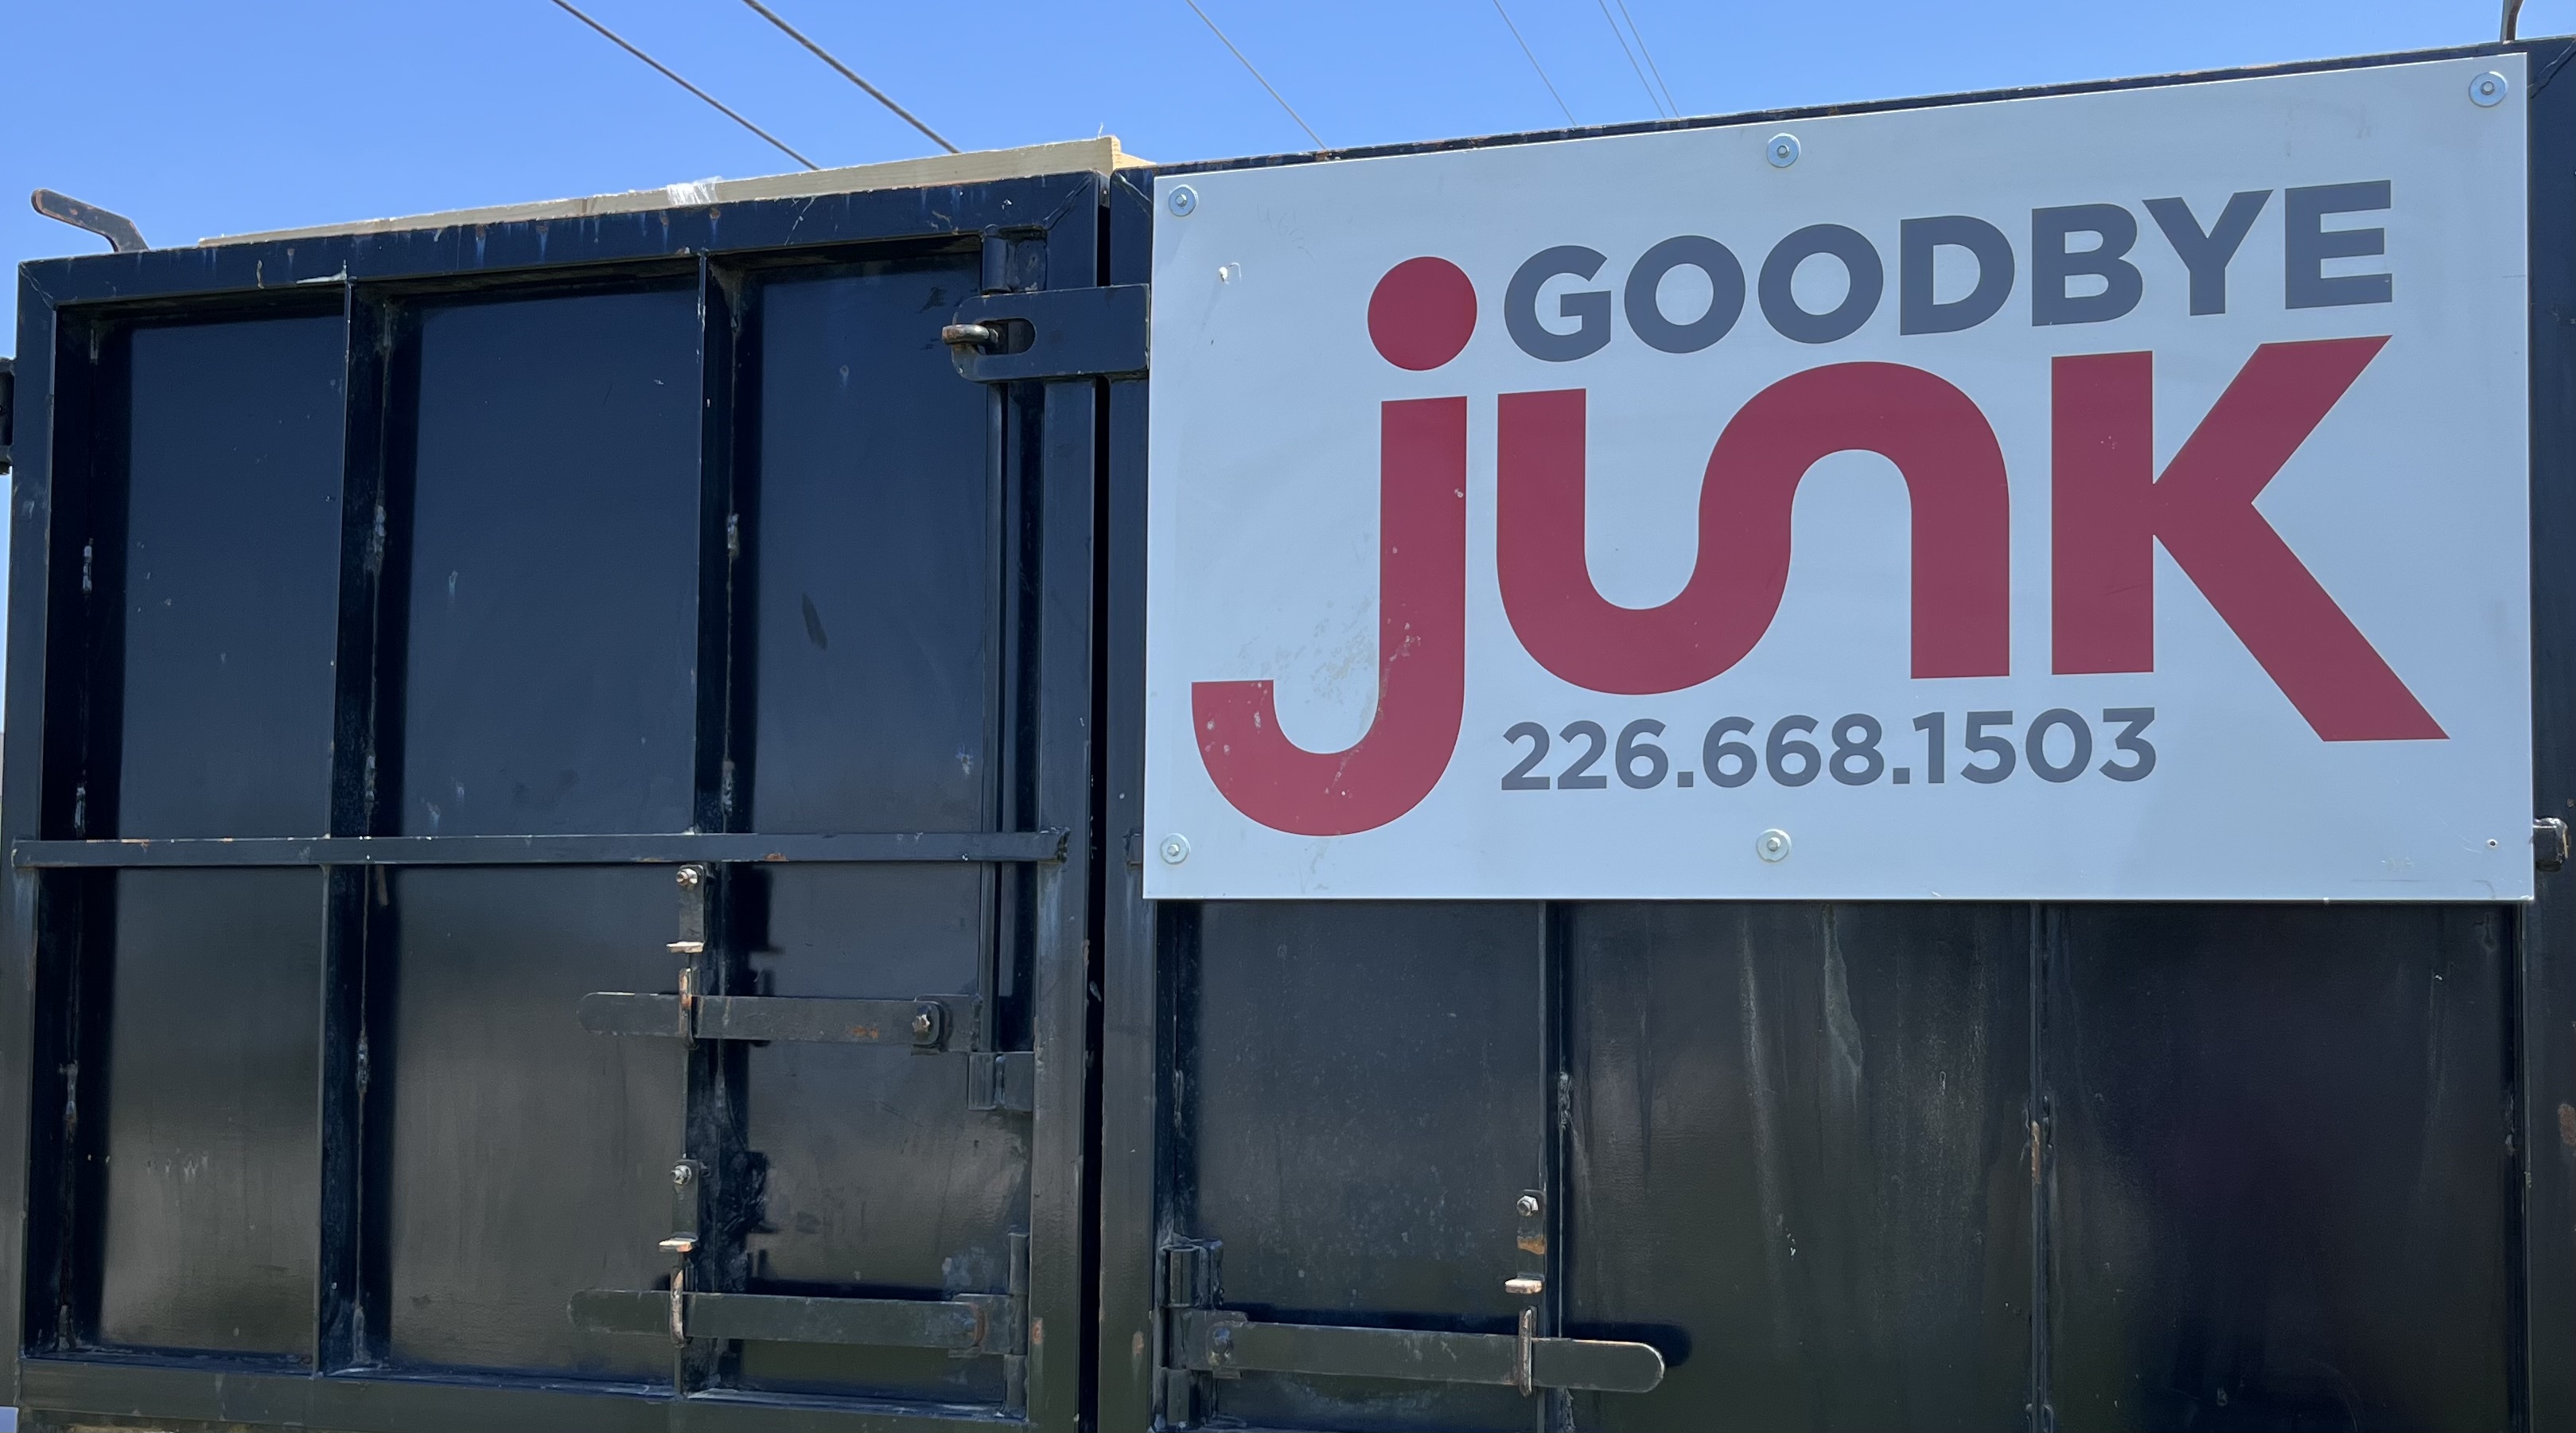 Get all your questions related to Junk Removal answered by Goodbye Junk